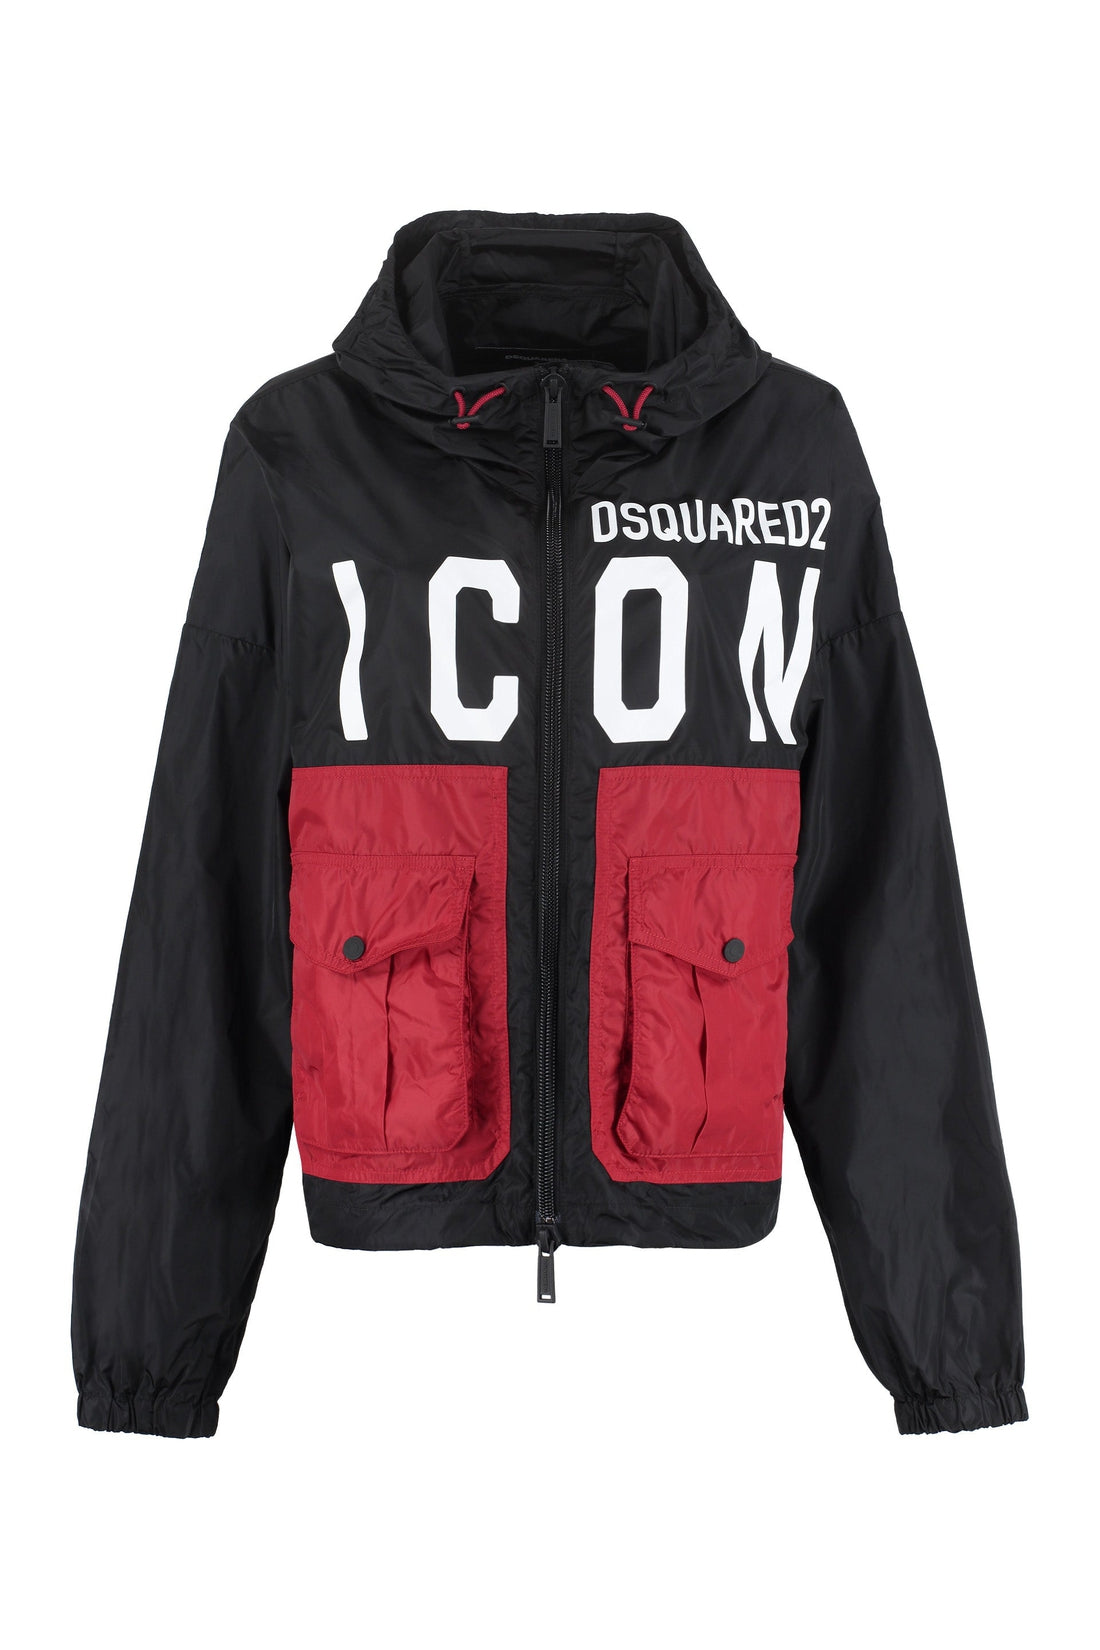 Dsquared2-OUTLET-SALE-Icon hooded windbreaker-ARCHIVIST